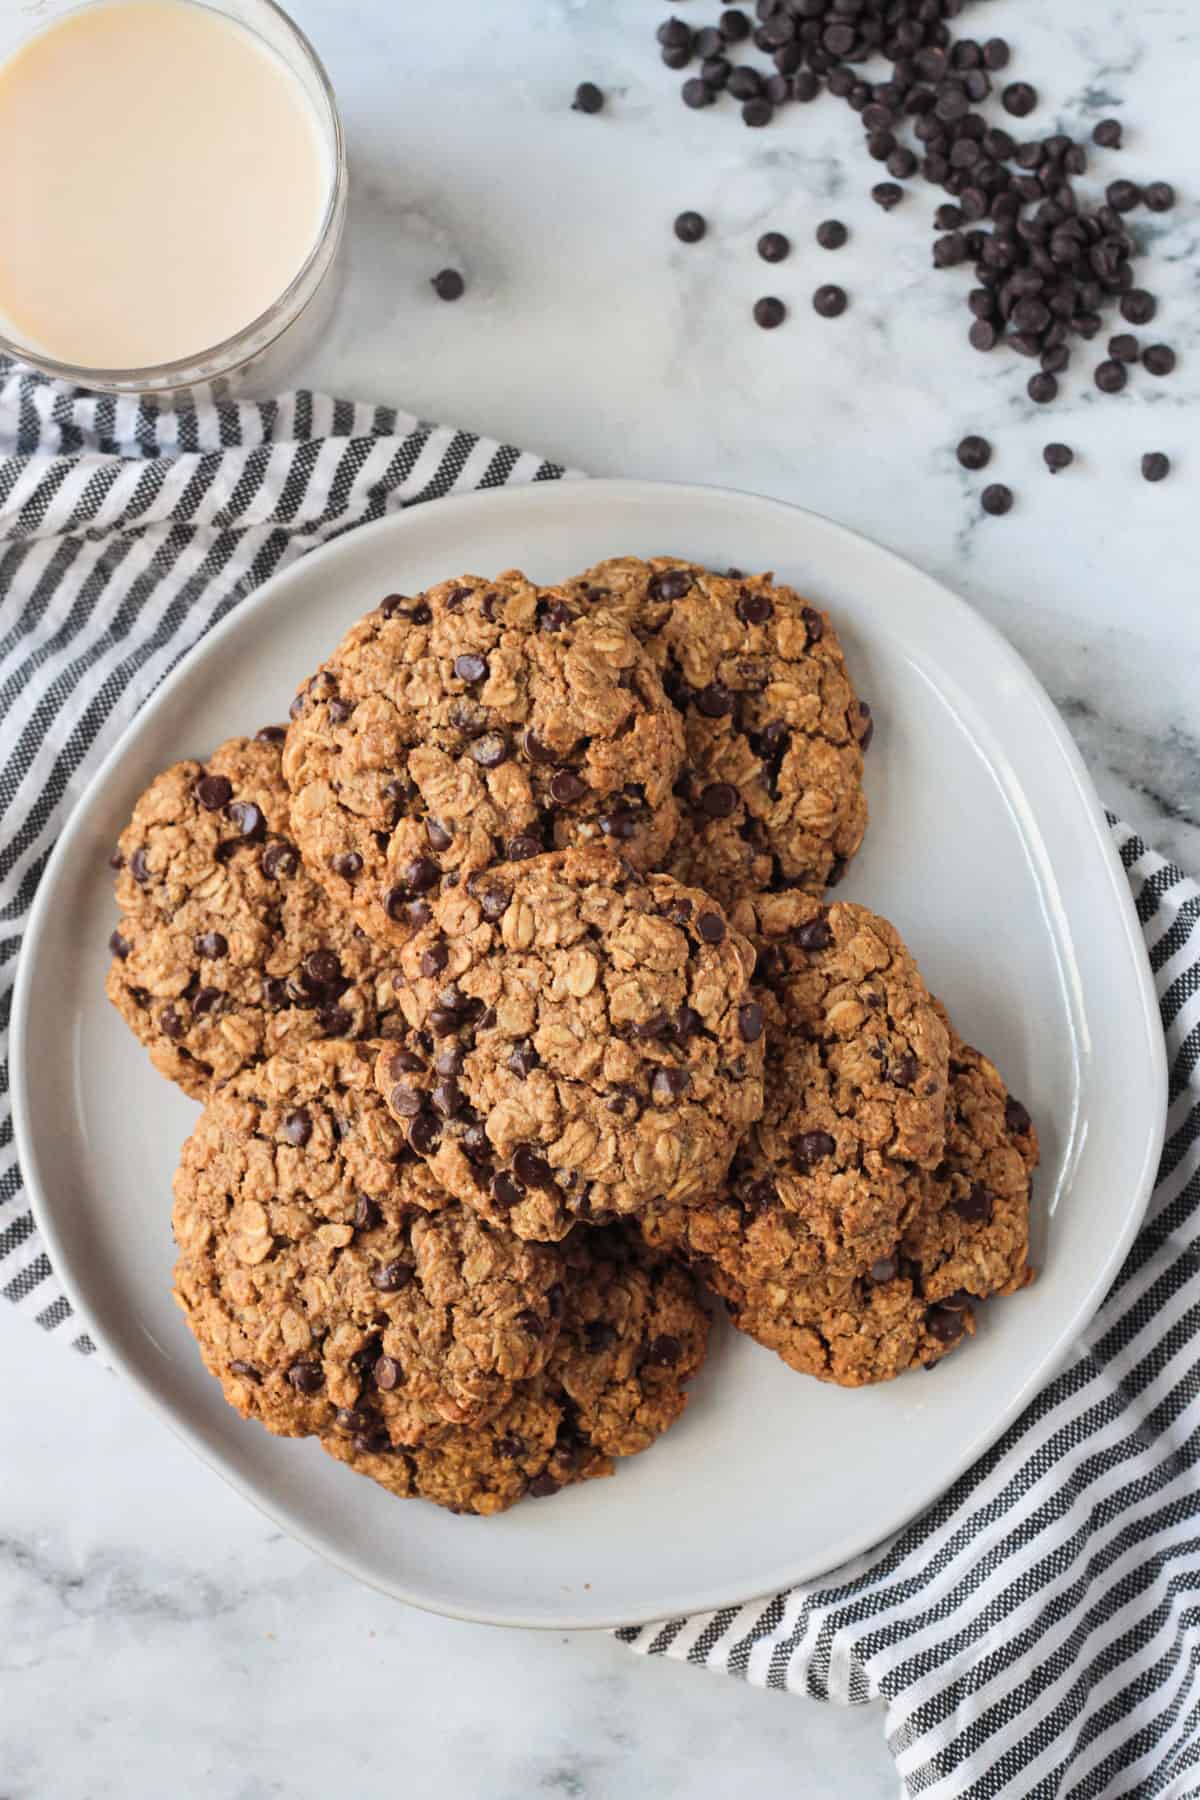 Overhead view of a pile of vegan oatmeal chocolate chip cookies on a plate.